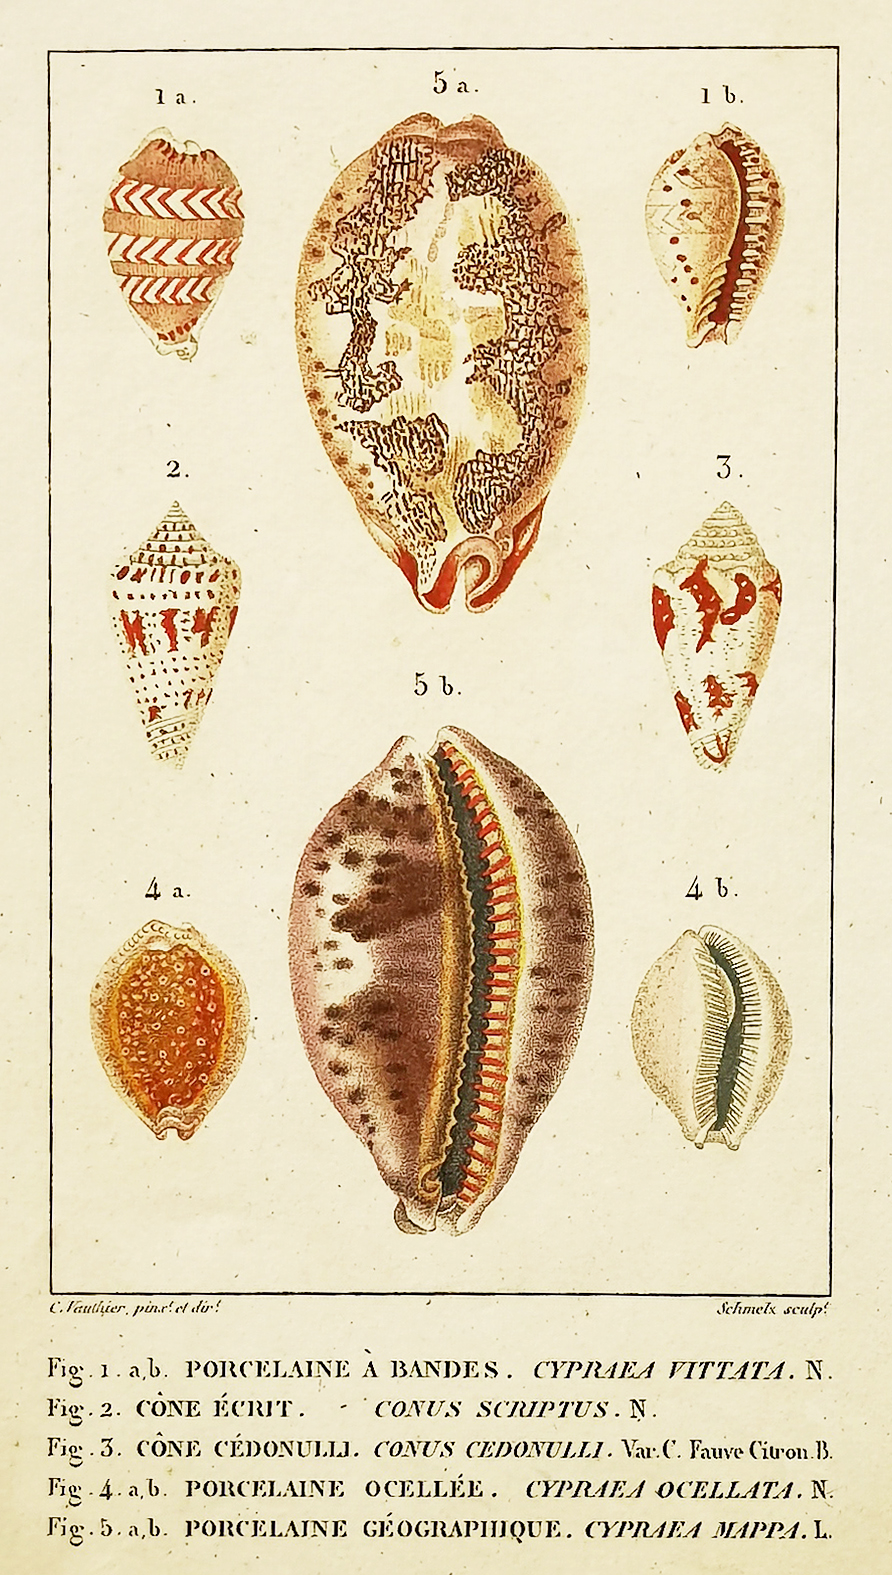 Fig 1. Porcelaine A. Bandes Fig 2. Cone Ecrut. Fig 3. Cone Cedonulli. Fig 4. Porcelaine Ocellee. Fig 5. Porcelaine Geographique. - Antique Print from 1824